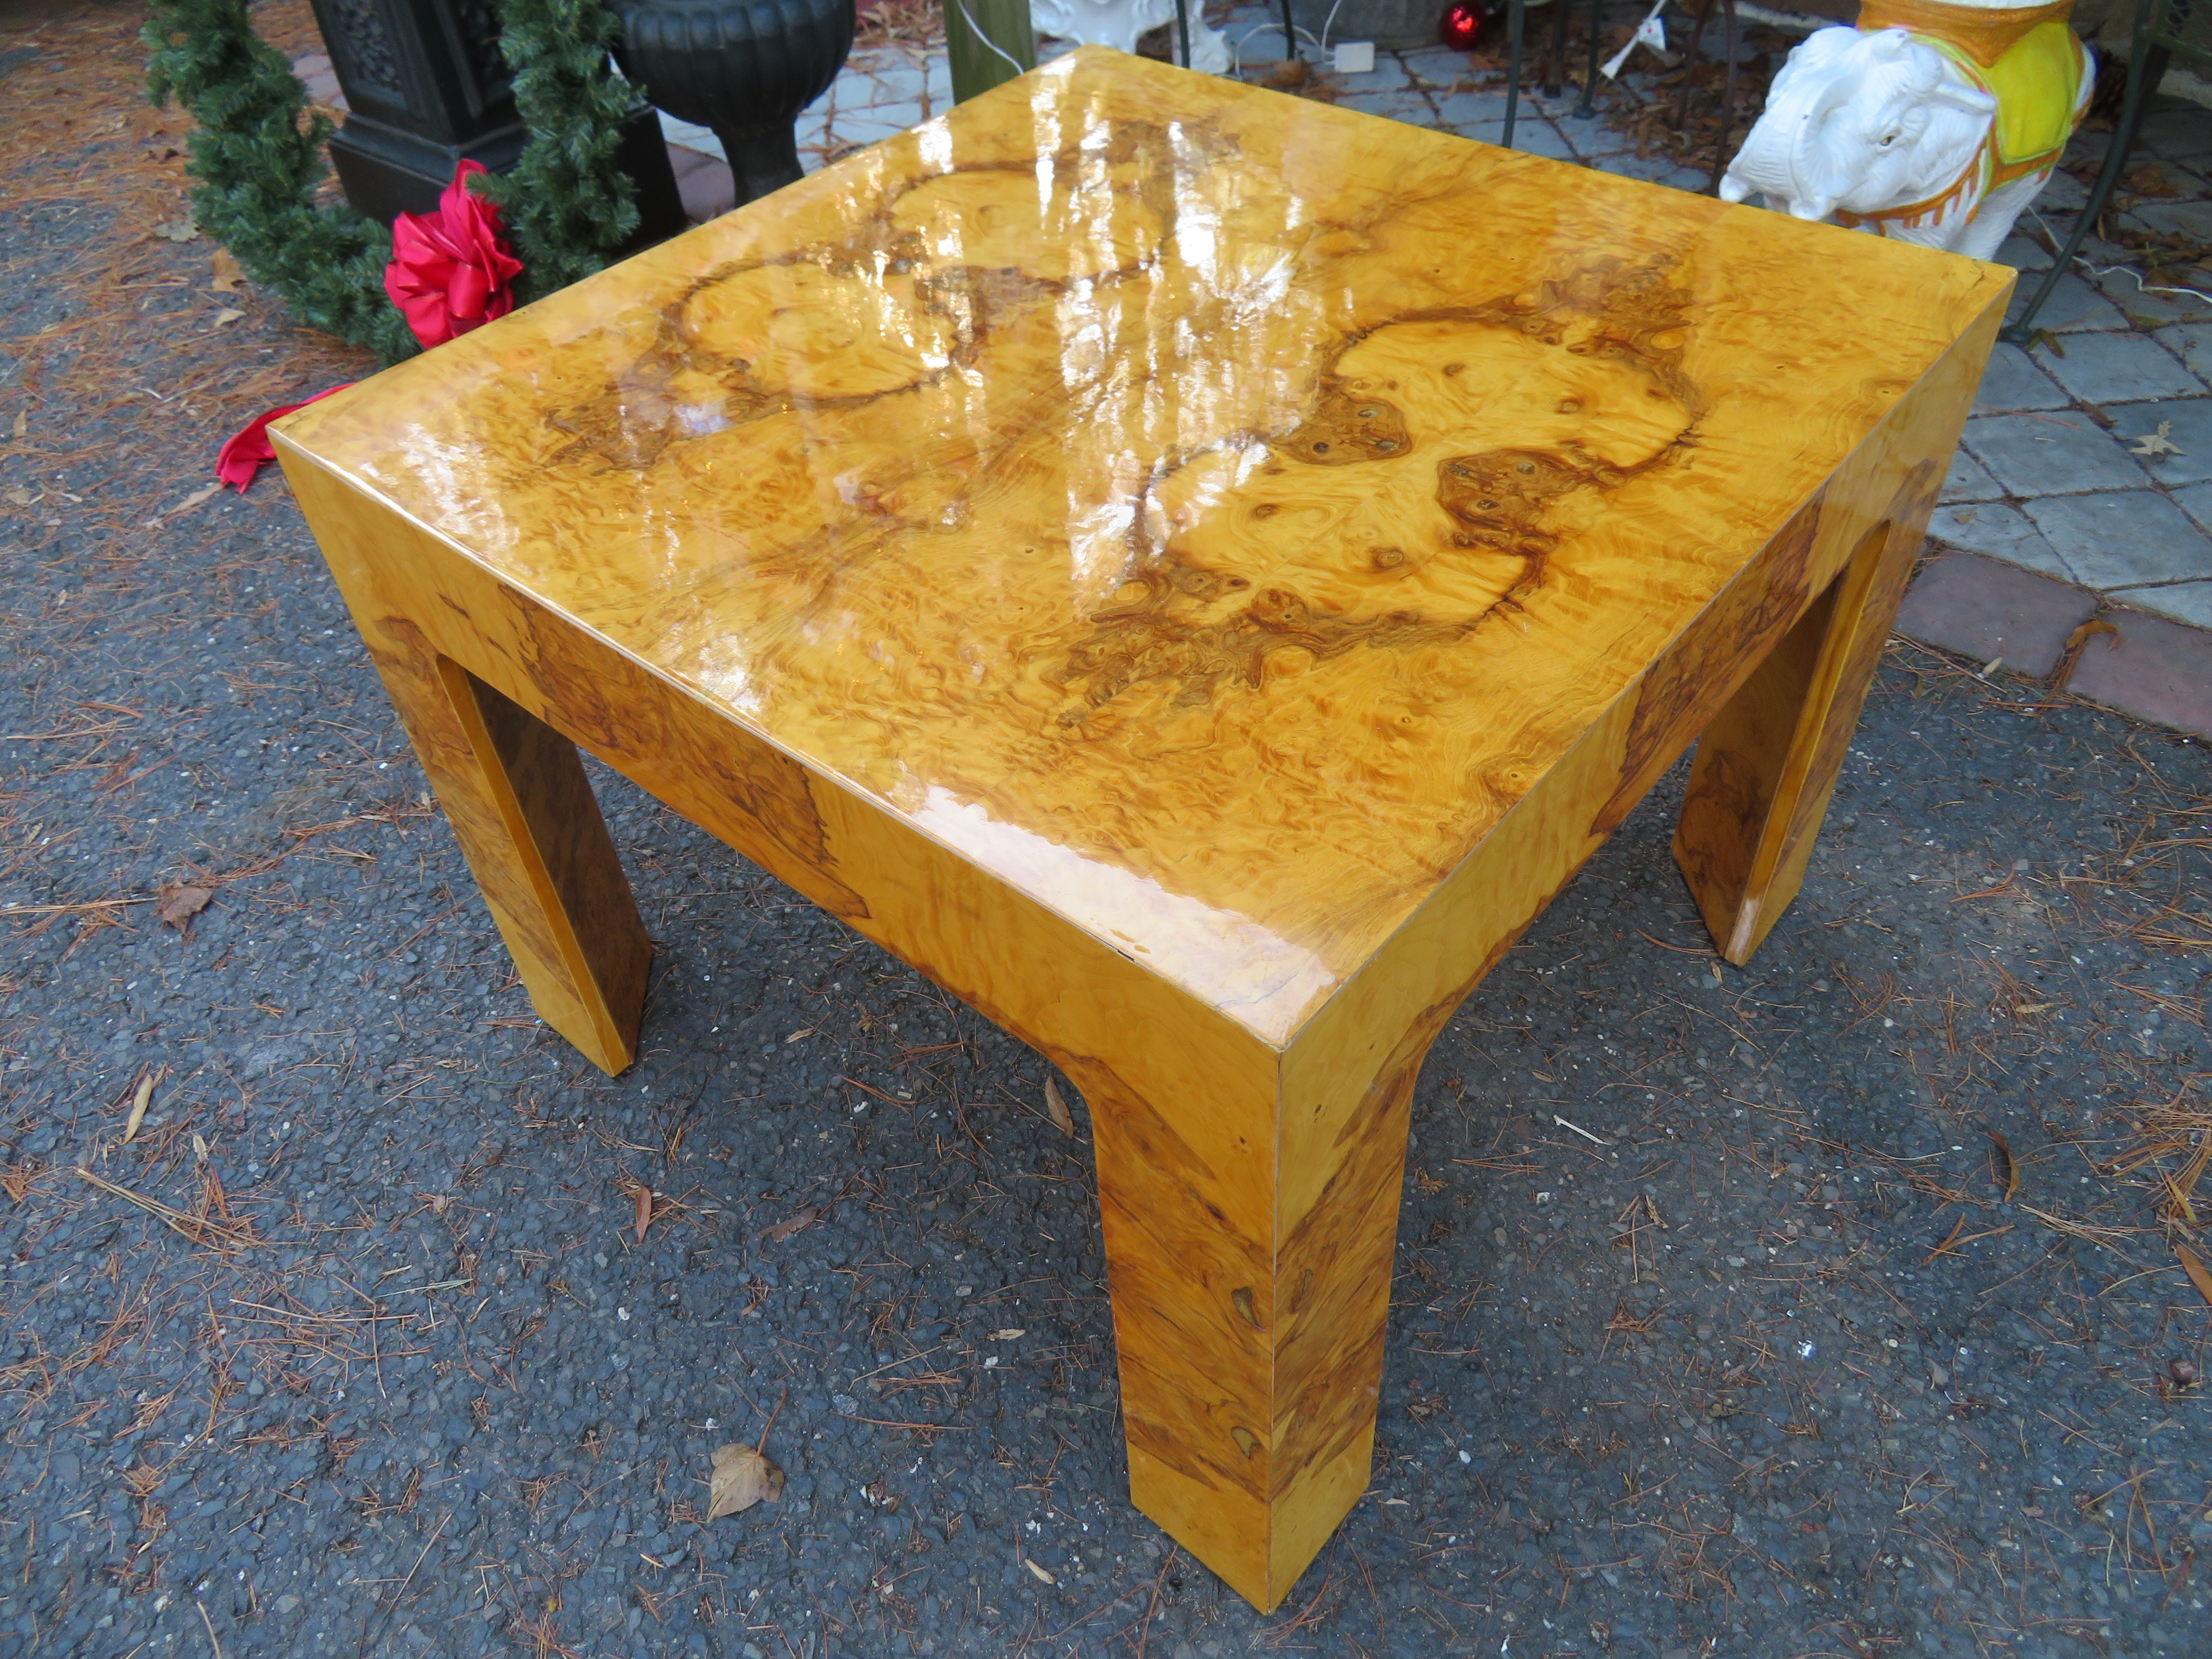 Marvellous Mio Baughman style burl olive wood square end table. This table is in very nice vintage condition with only light signs of age. The finish is super glossy and still looks great. It measures 21.5